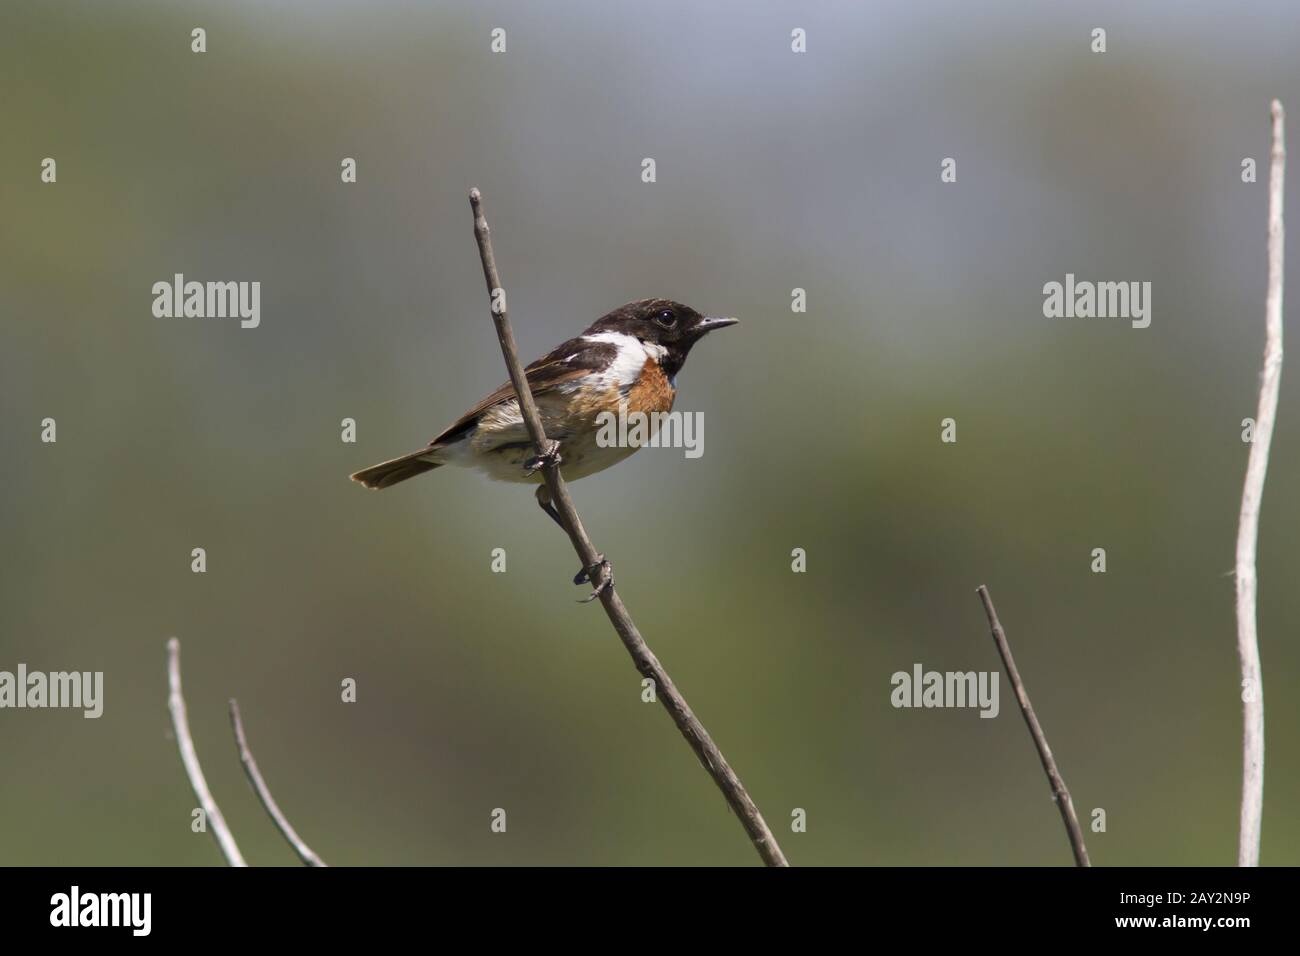 Male Stonechat sitting on a dry branch in the desert. Stock Photo